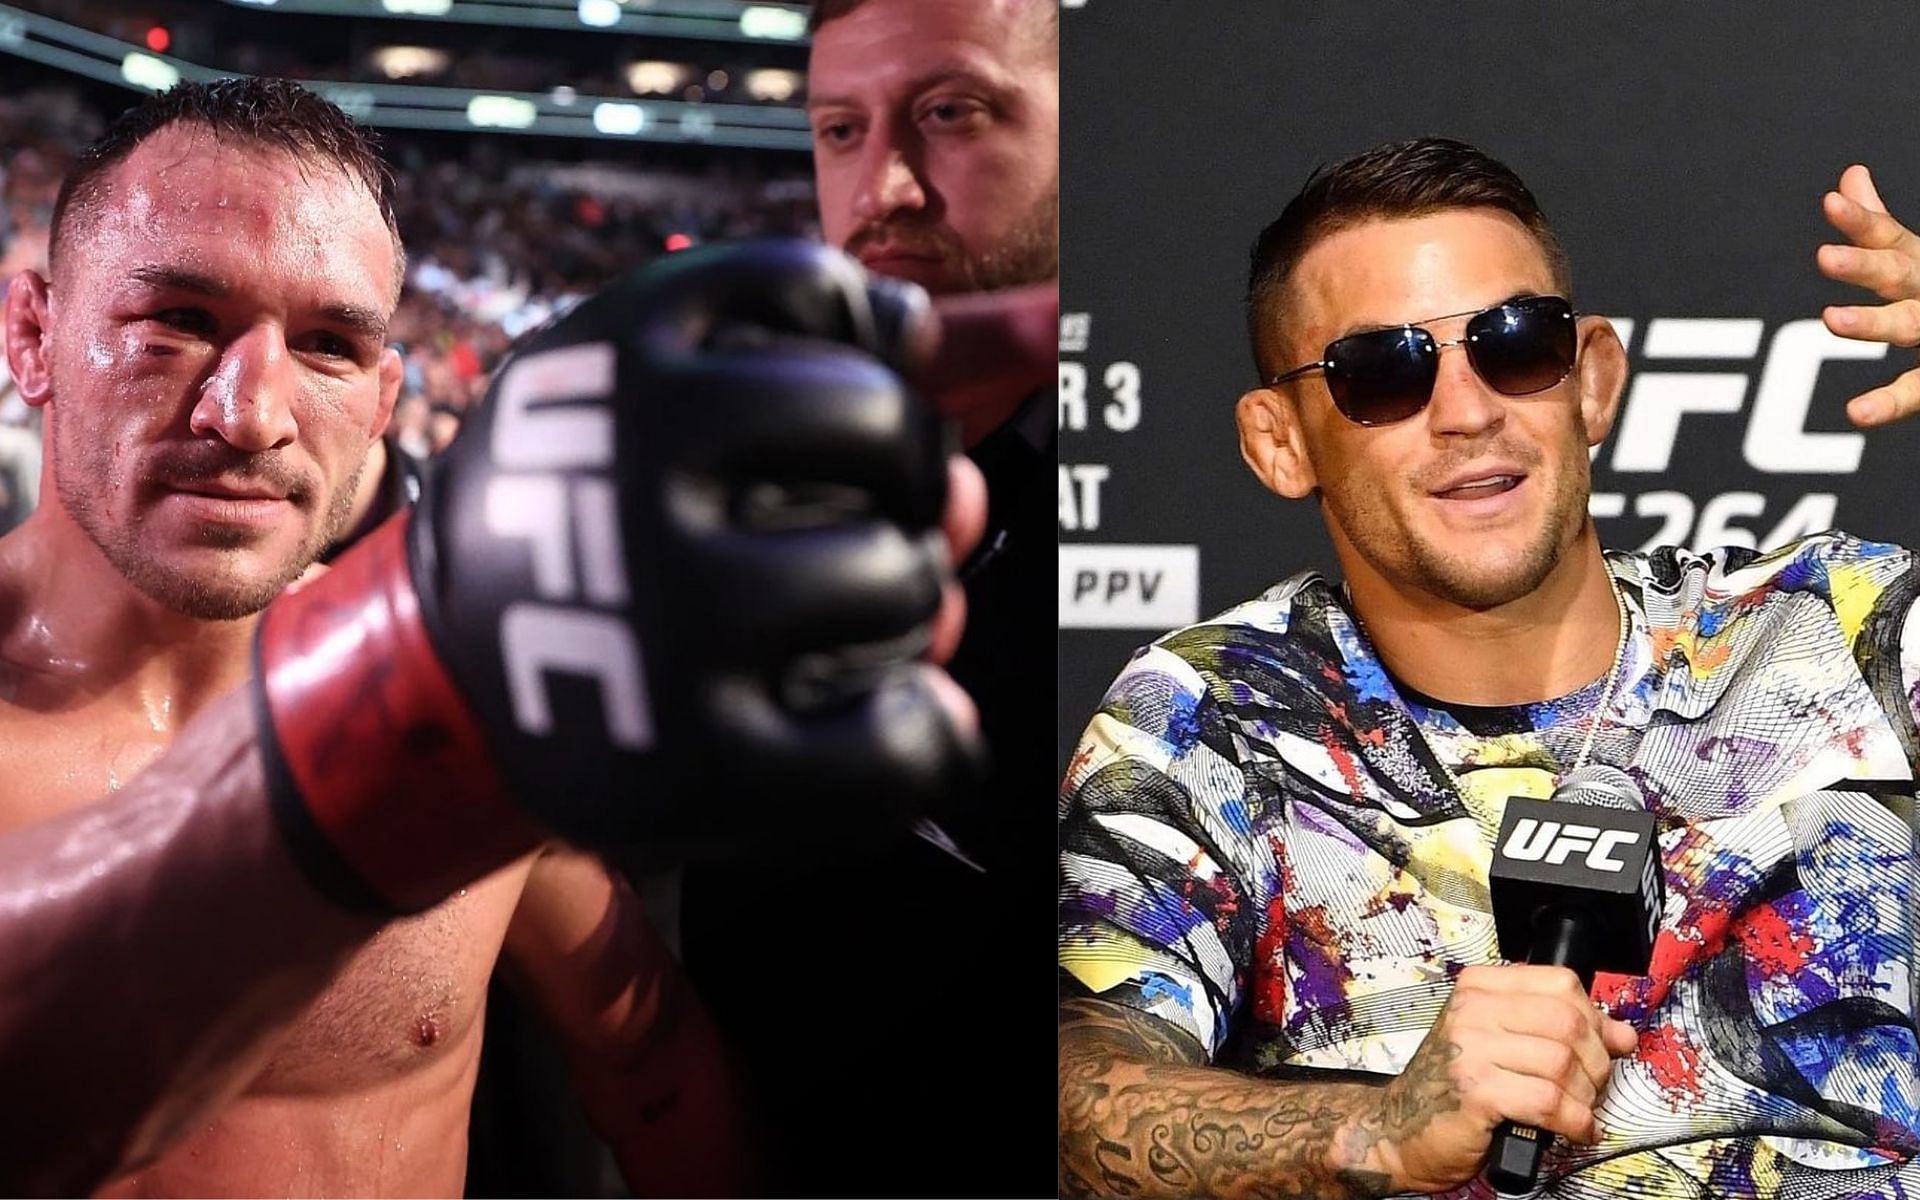 Michael Chandler (Left) and Dustin Poirier (Right) [Images via: @mikechandlermma and @dustinpoirier on Instagram]